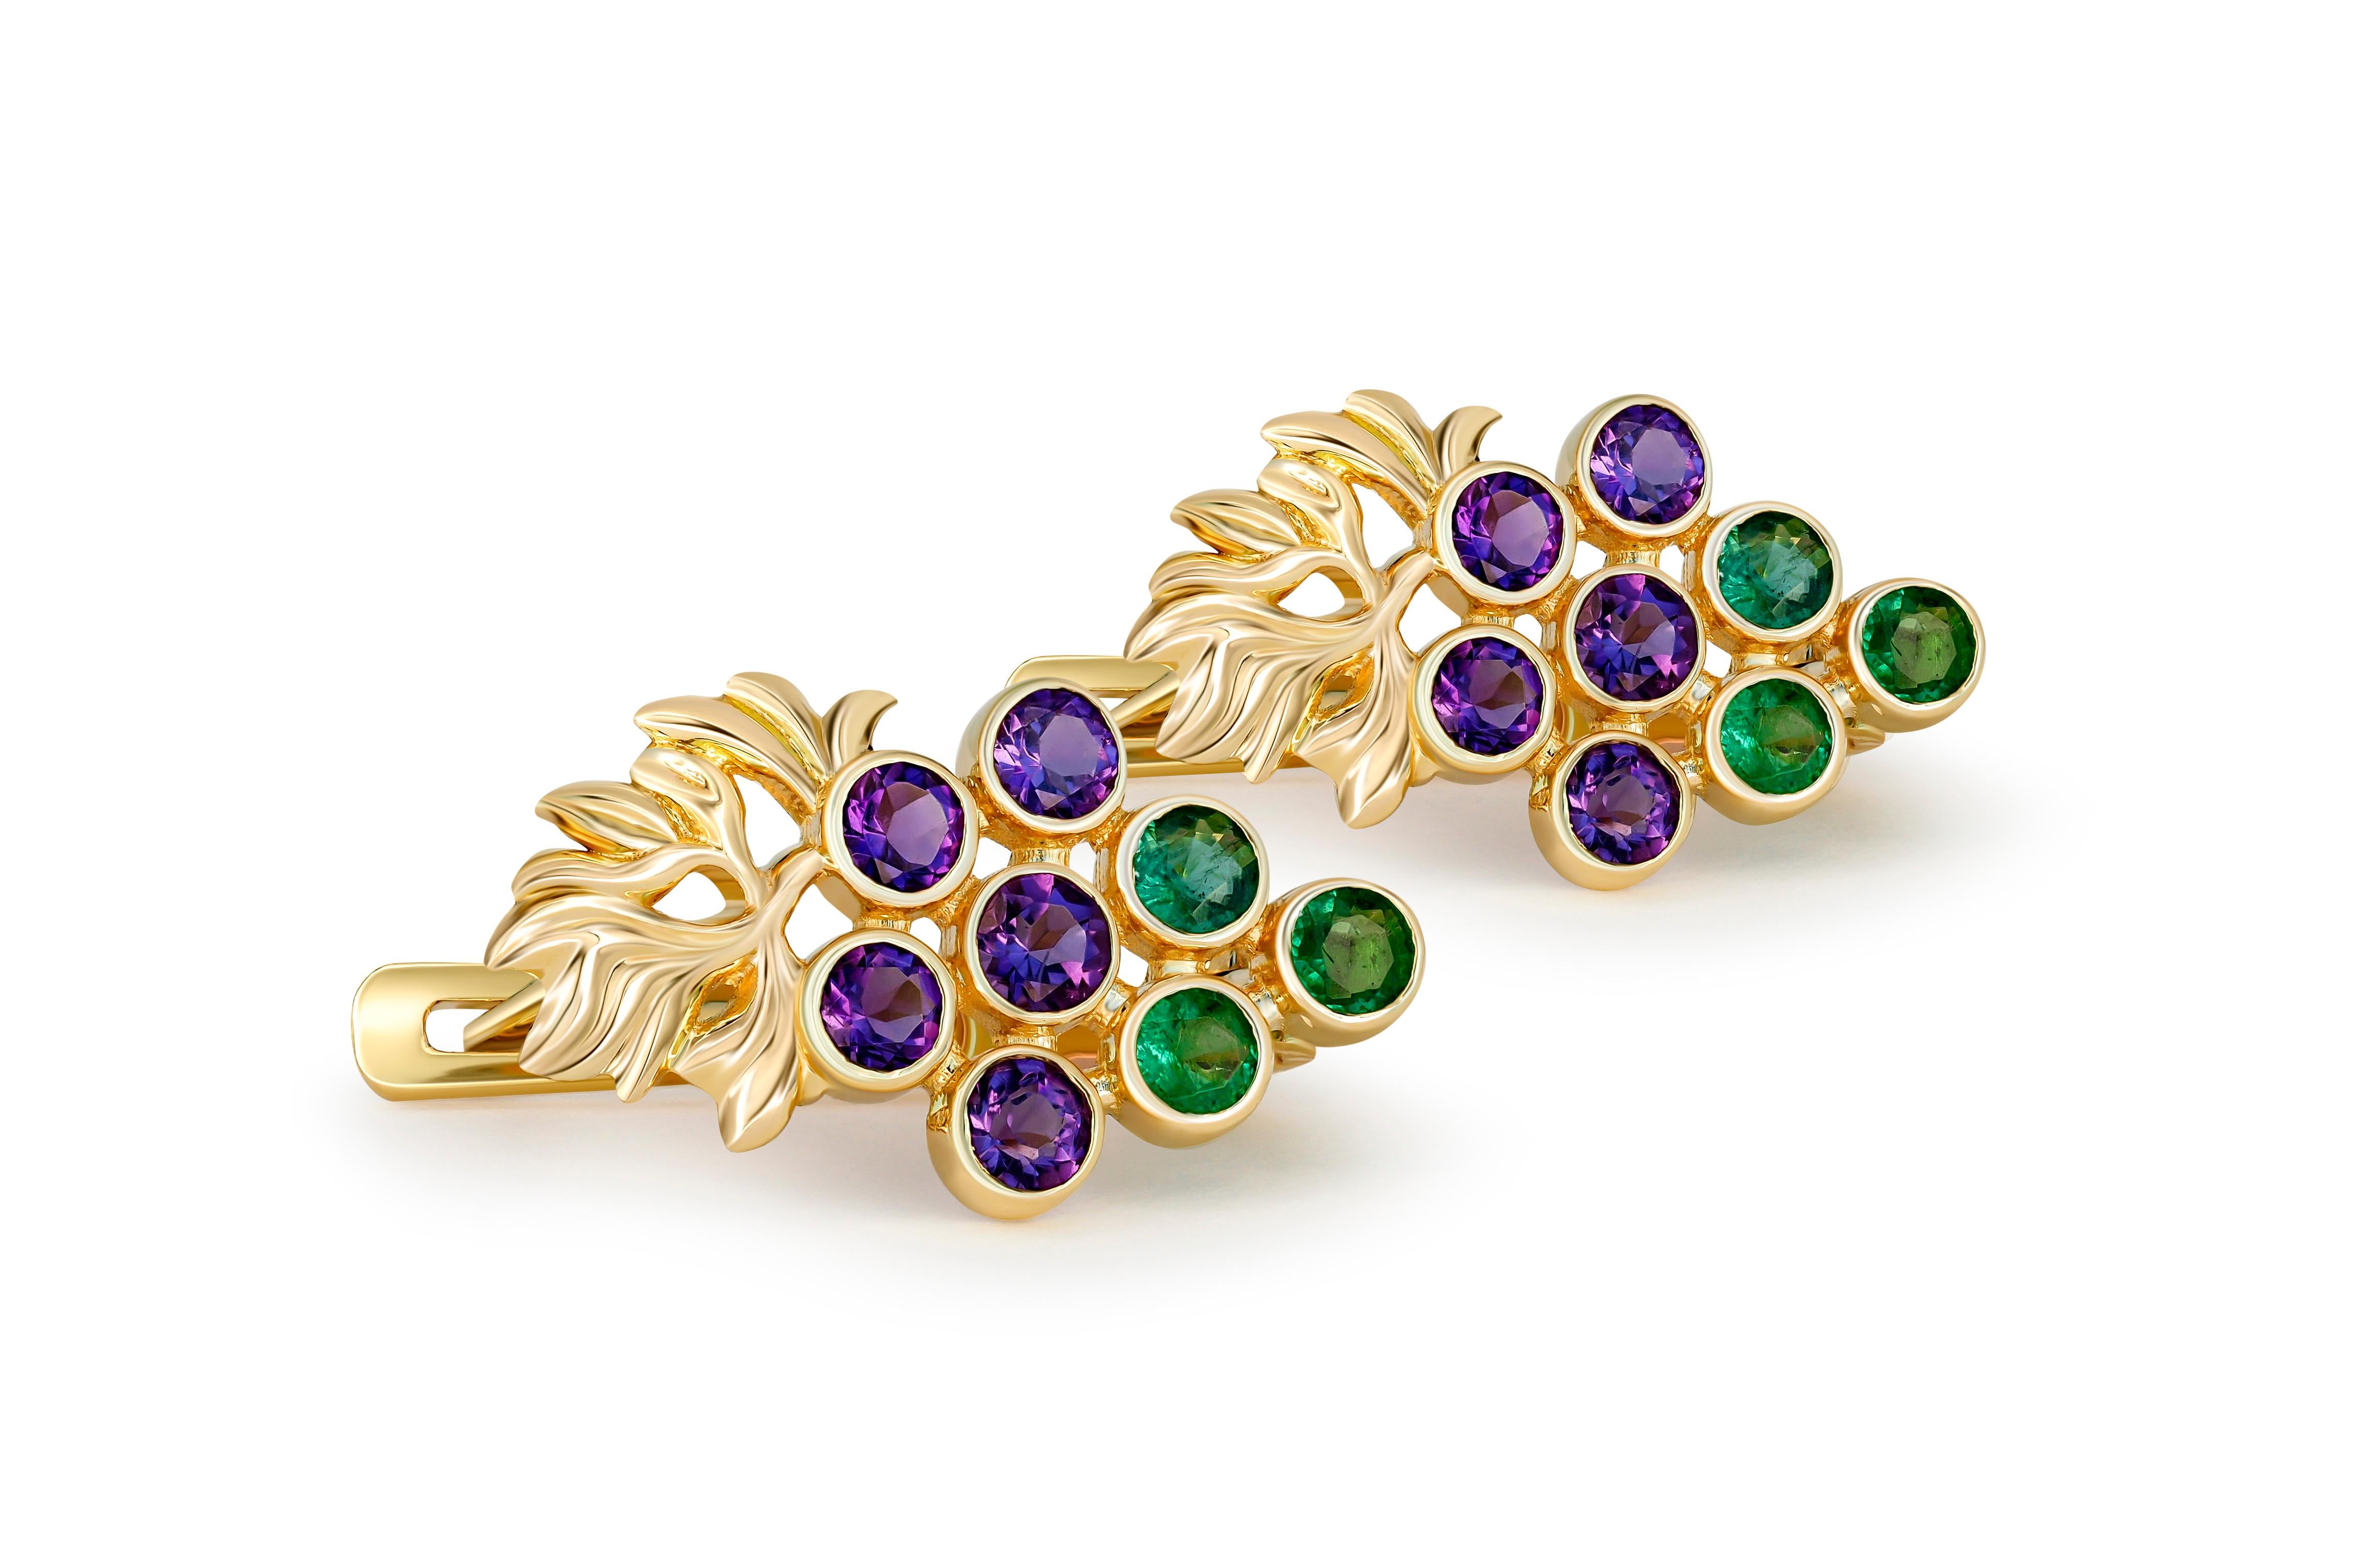 Grape Earrings with emeralds and amethysts in 14k gold. 
Vine Leaves Earrings. Gold fertility Earrings. Plant. Leaves. Floral earrings. 

Weight: 3.1 g. 
Size:17.5x10 mm
14k gold - tested.

Emeralds: 6 pieces, color - green
Round cut, 0.66 ct.